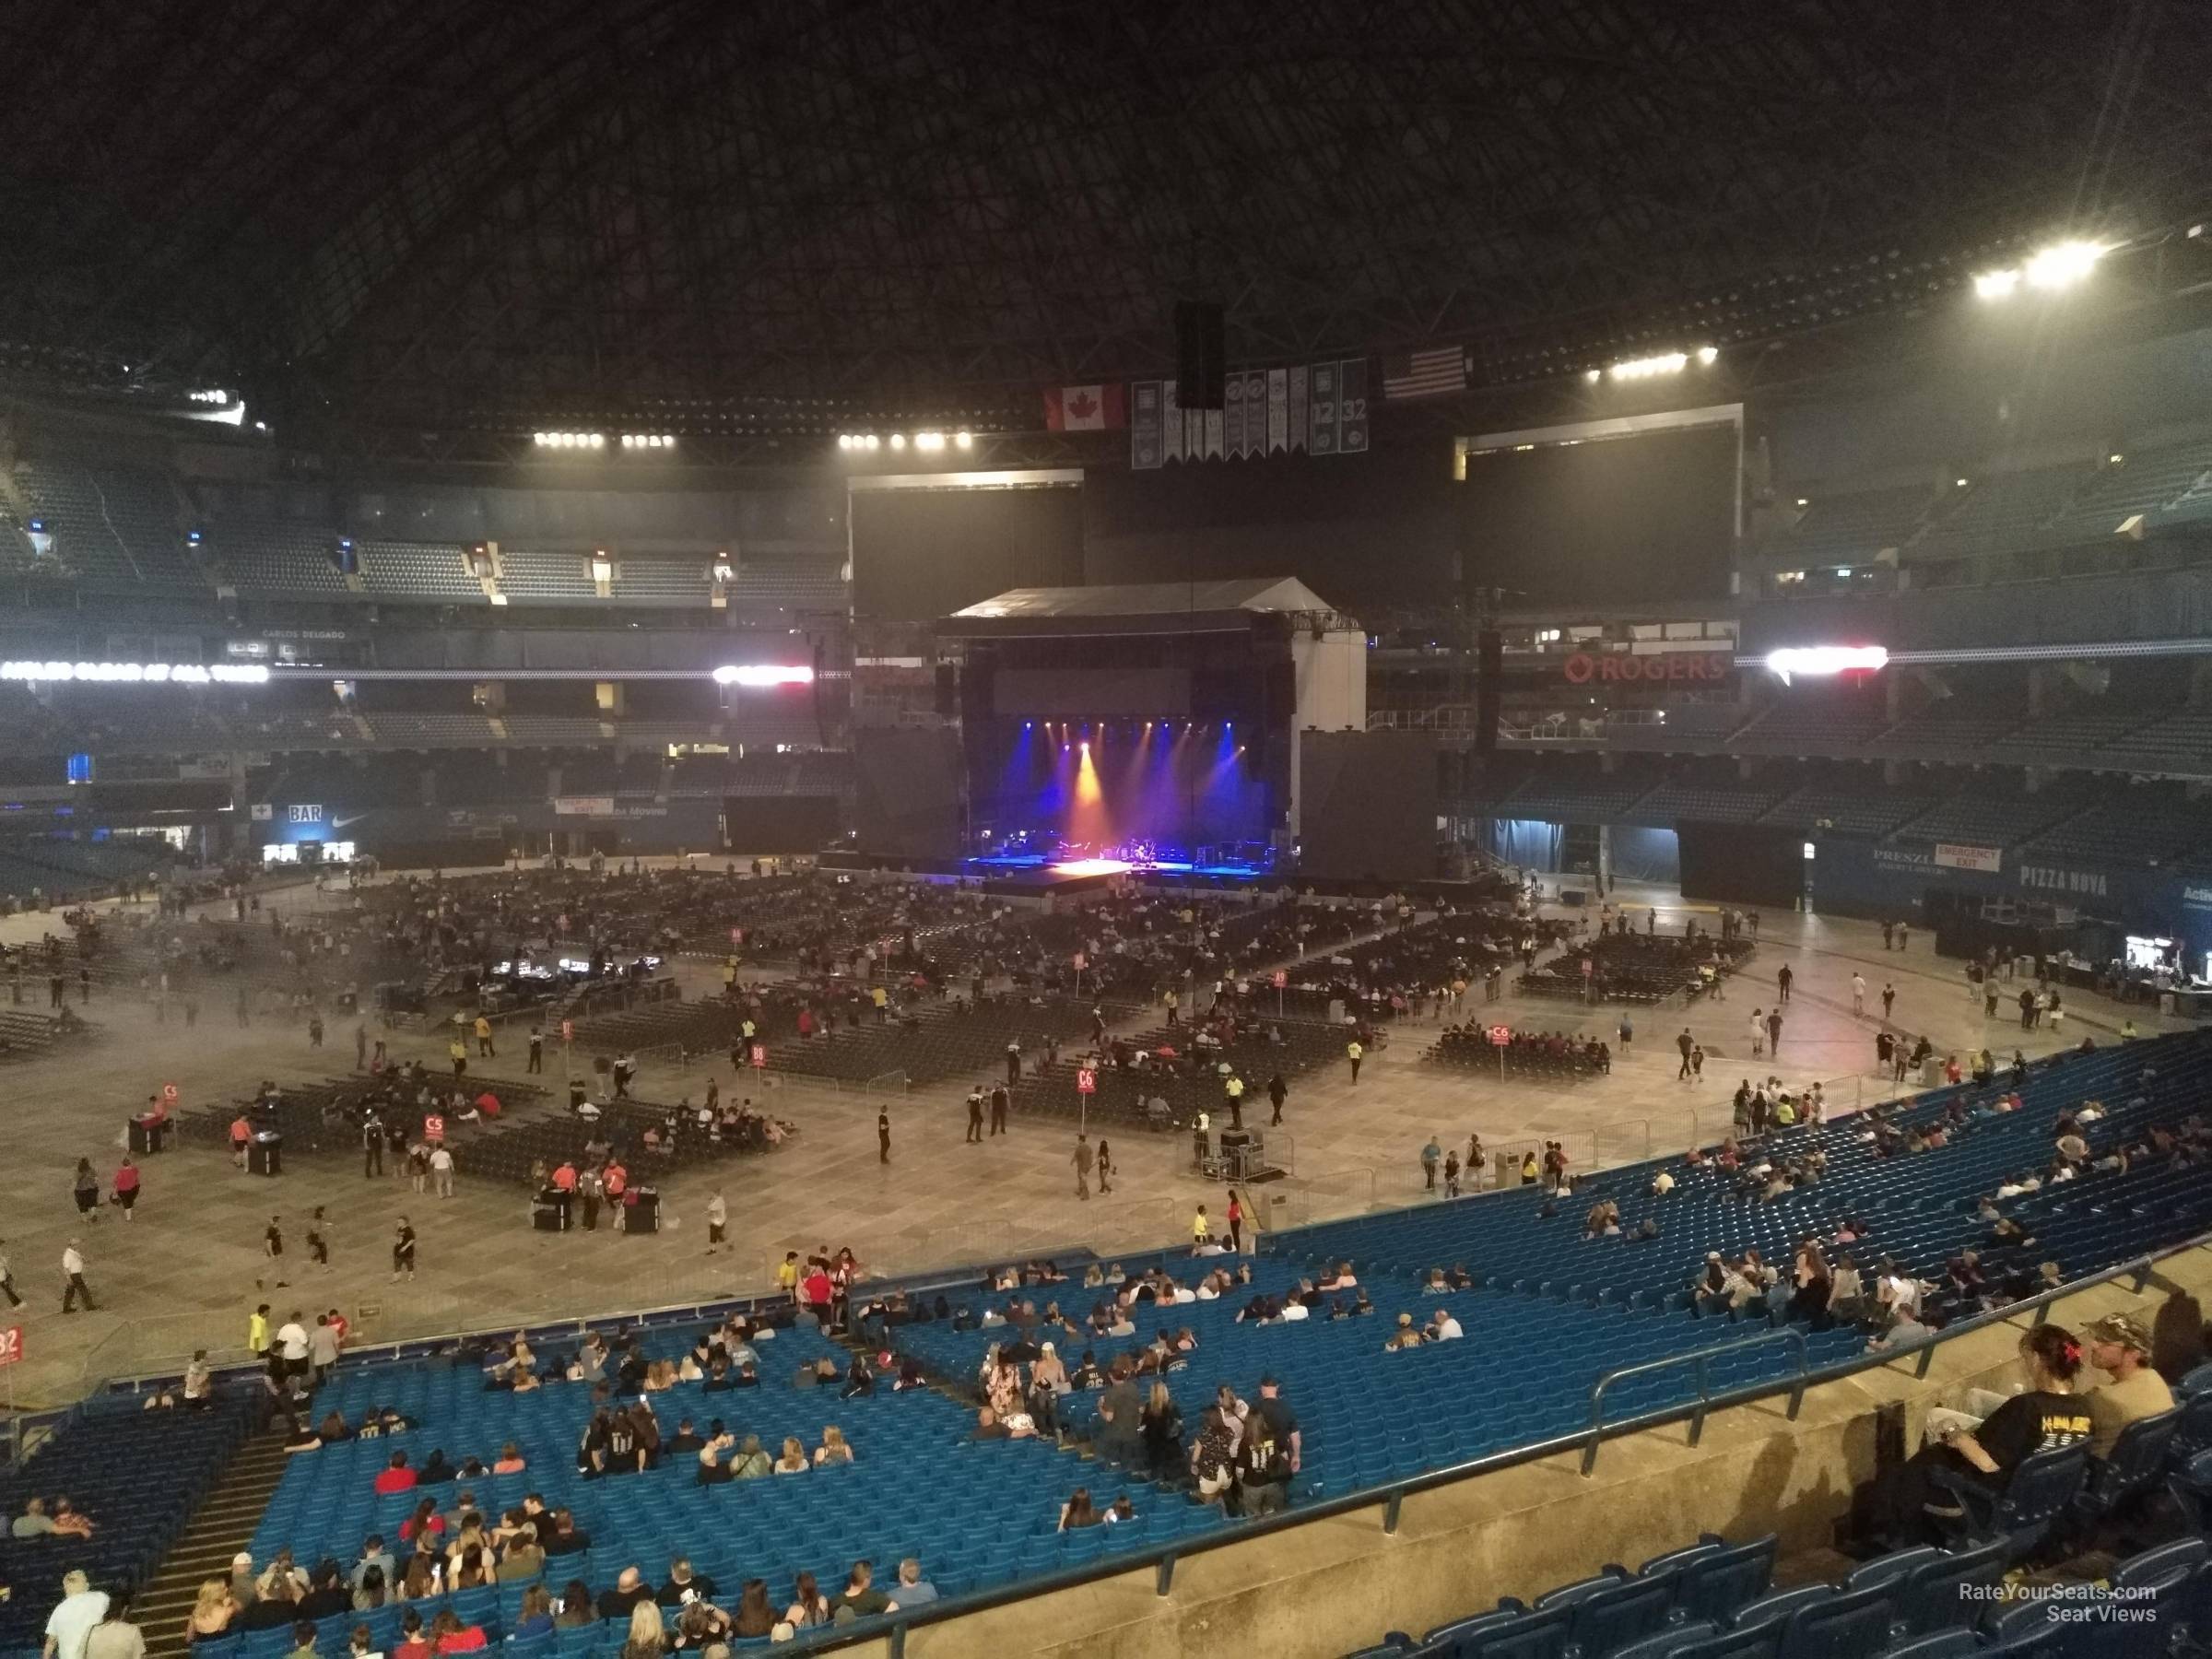 section 218, row 7 seat view  for concert - rogers centre